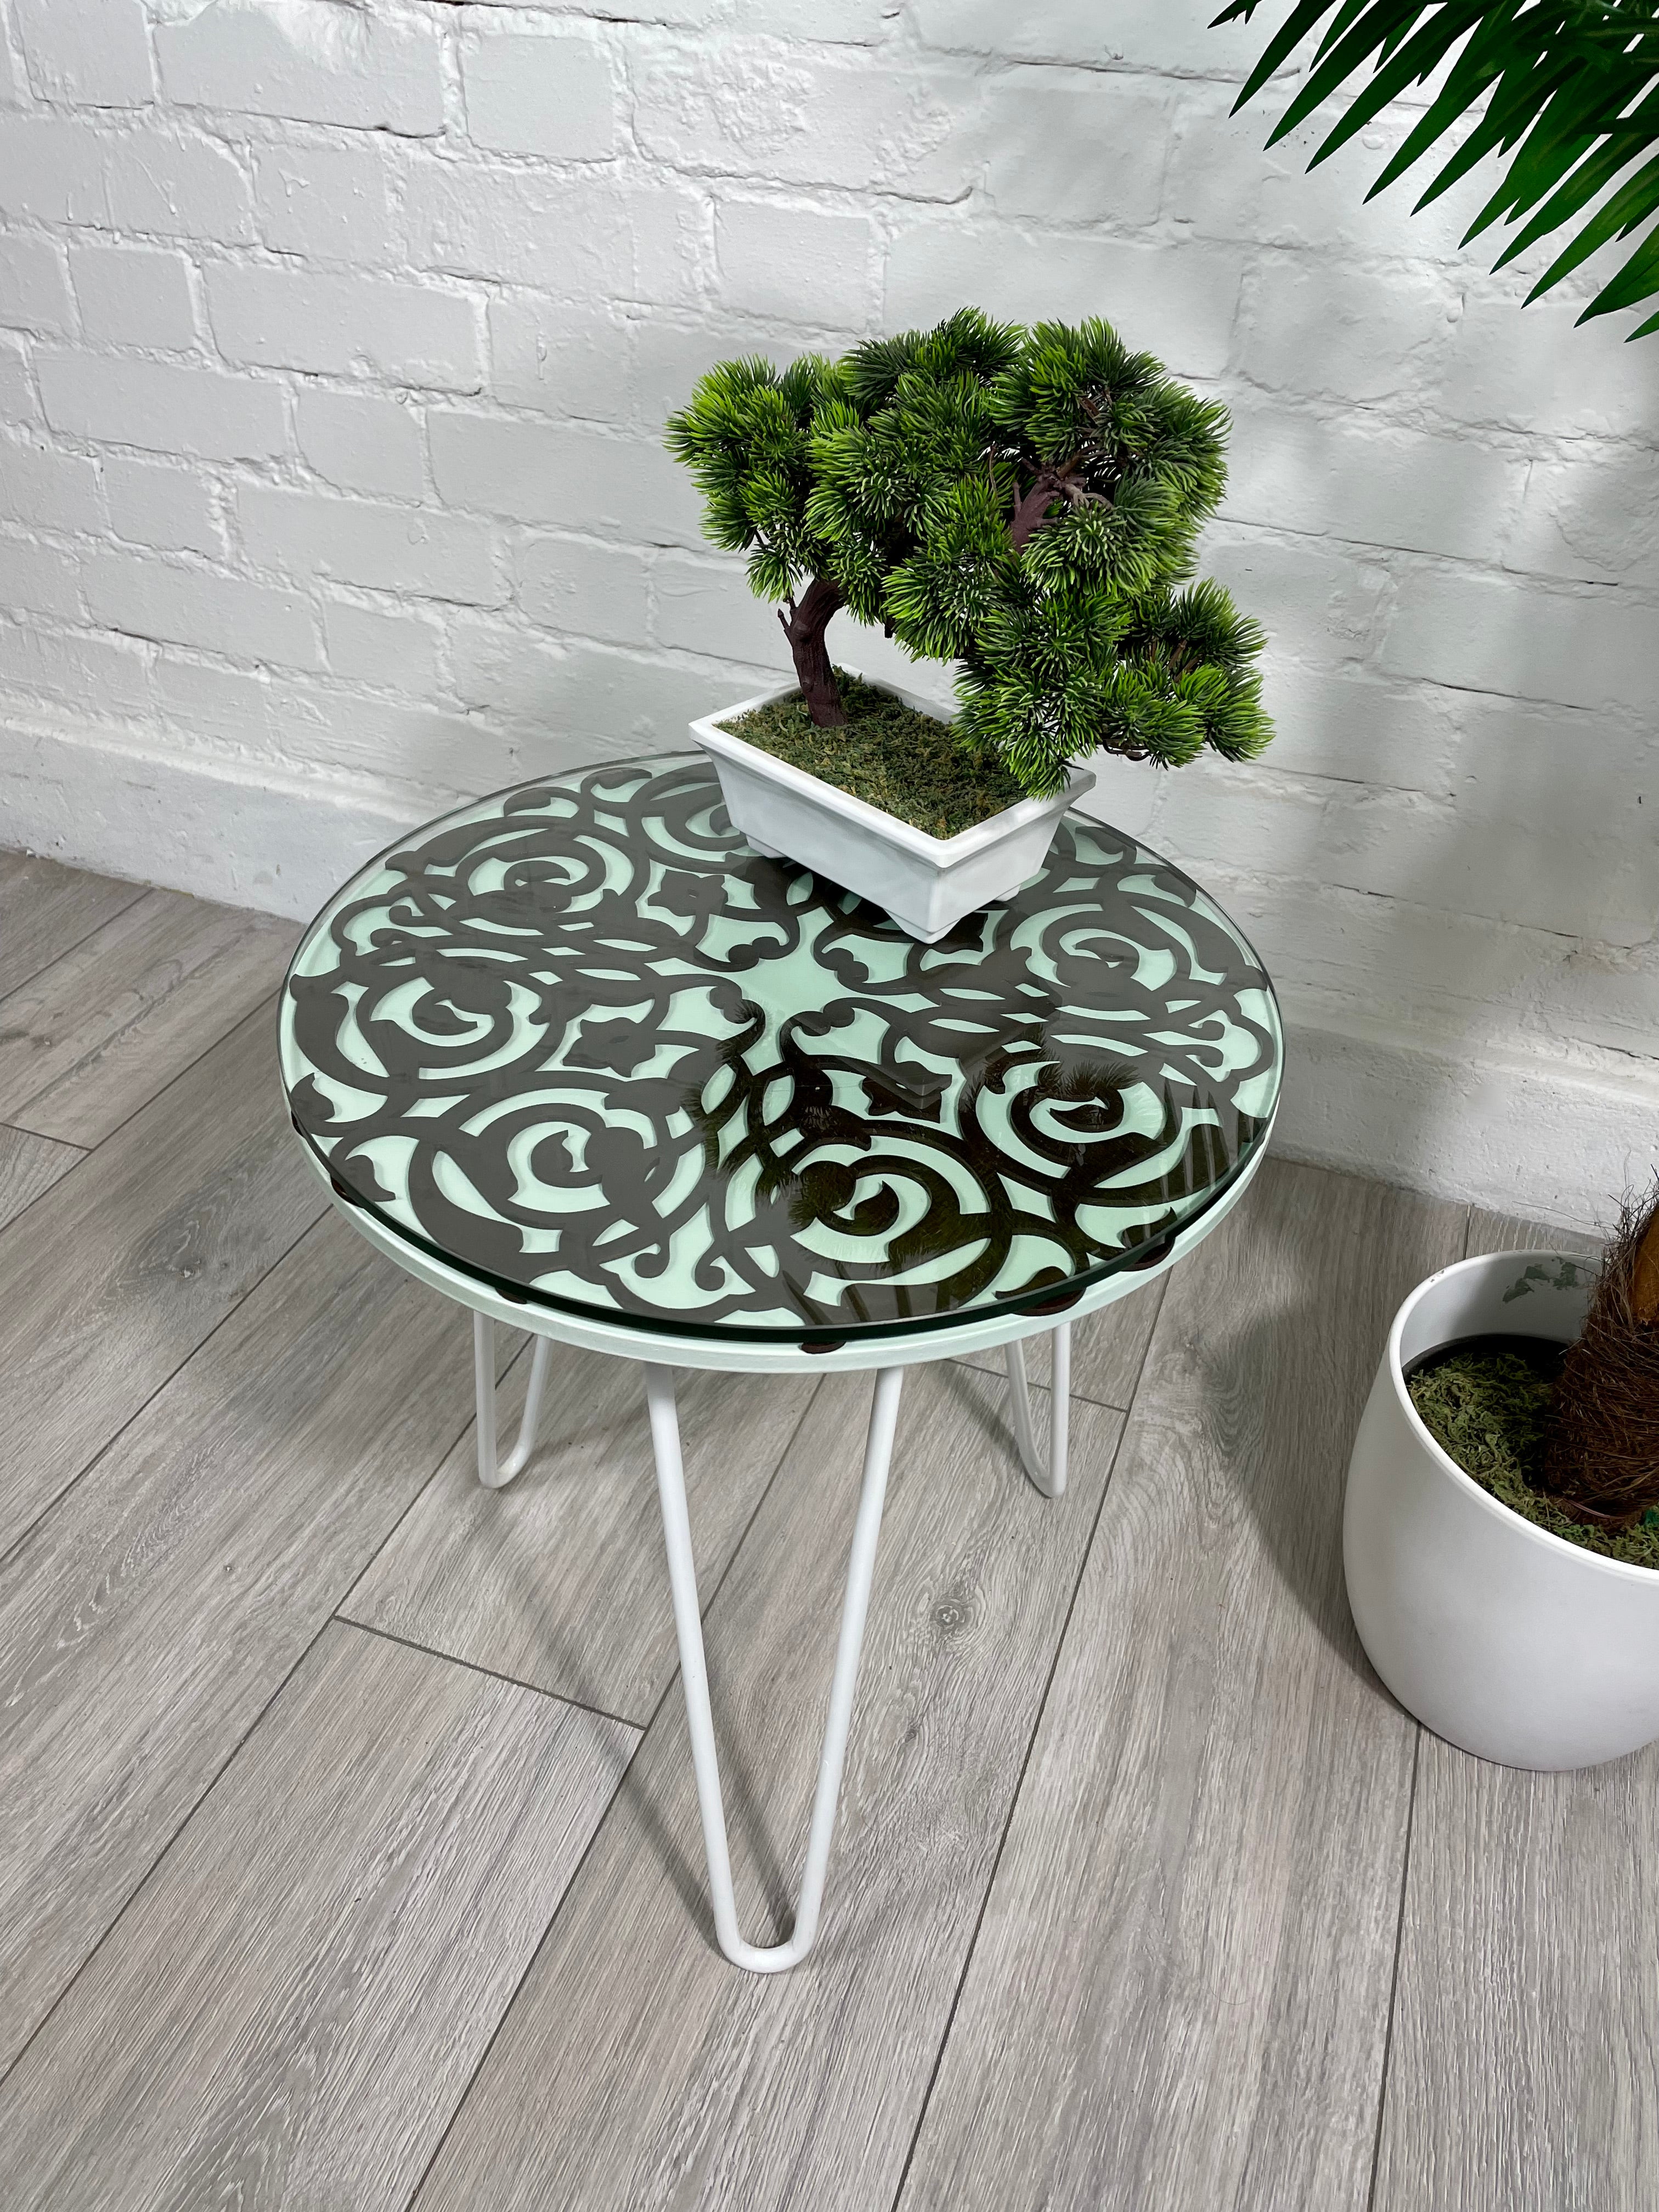 Green Pastel and Walnut finish side table with glass top and Pin legs